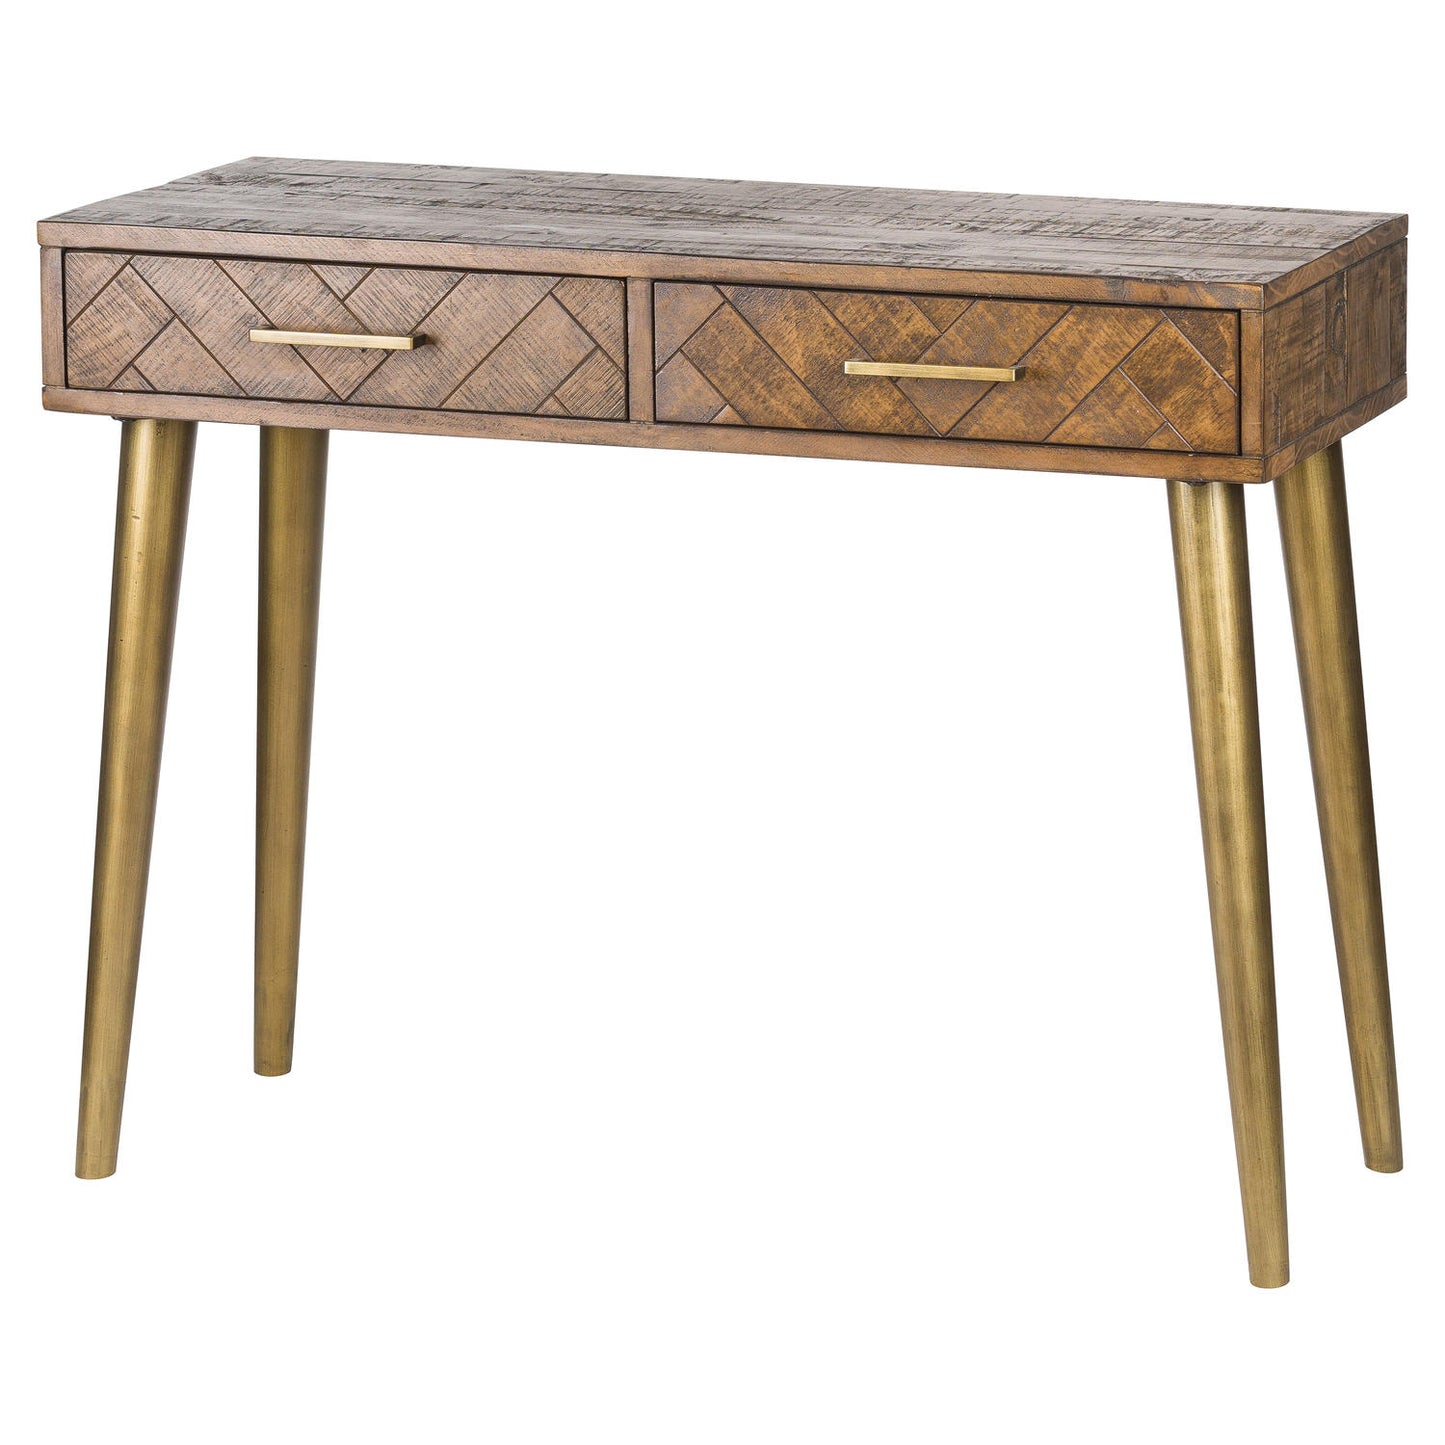 The Marlow Console Table